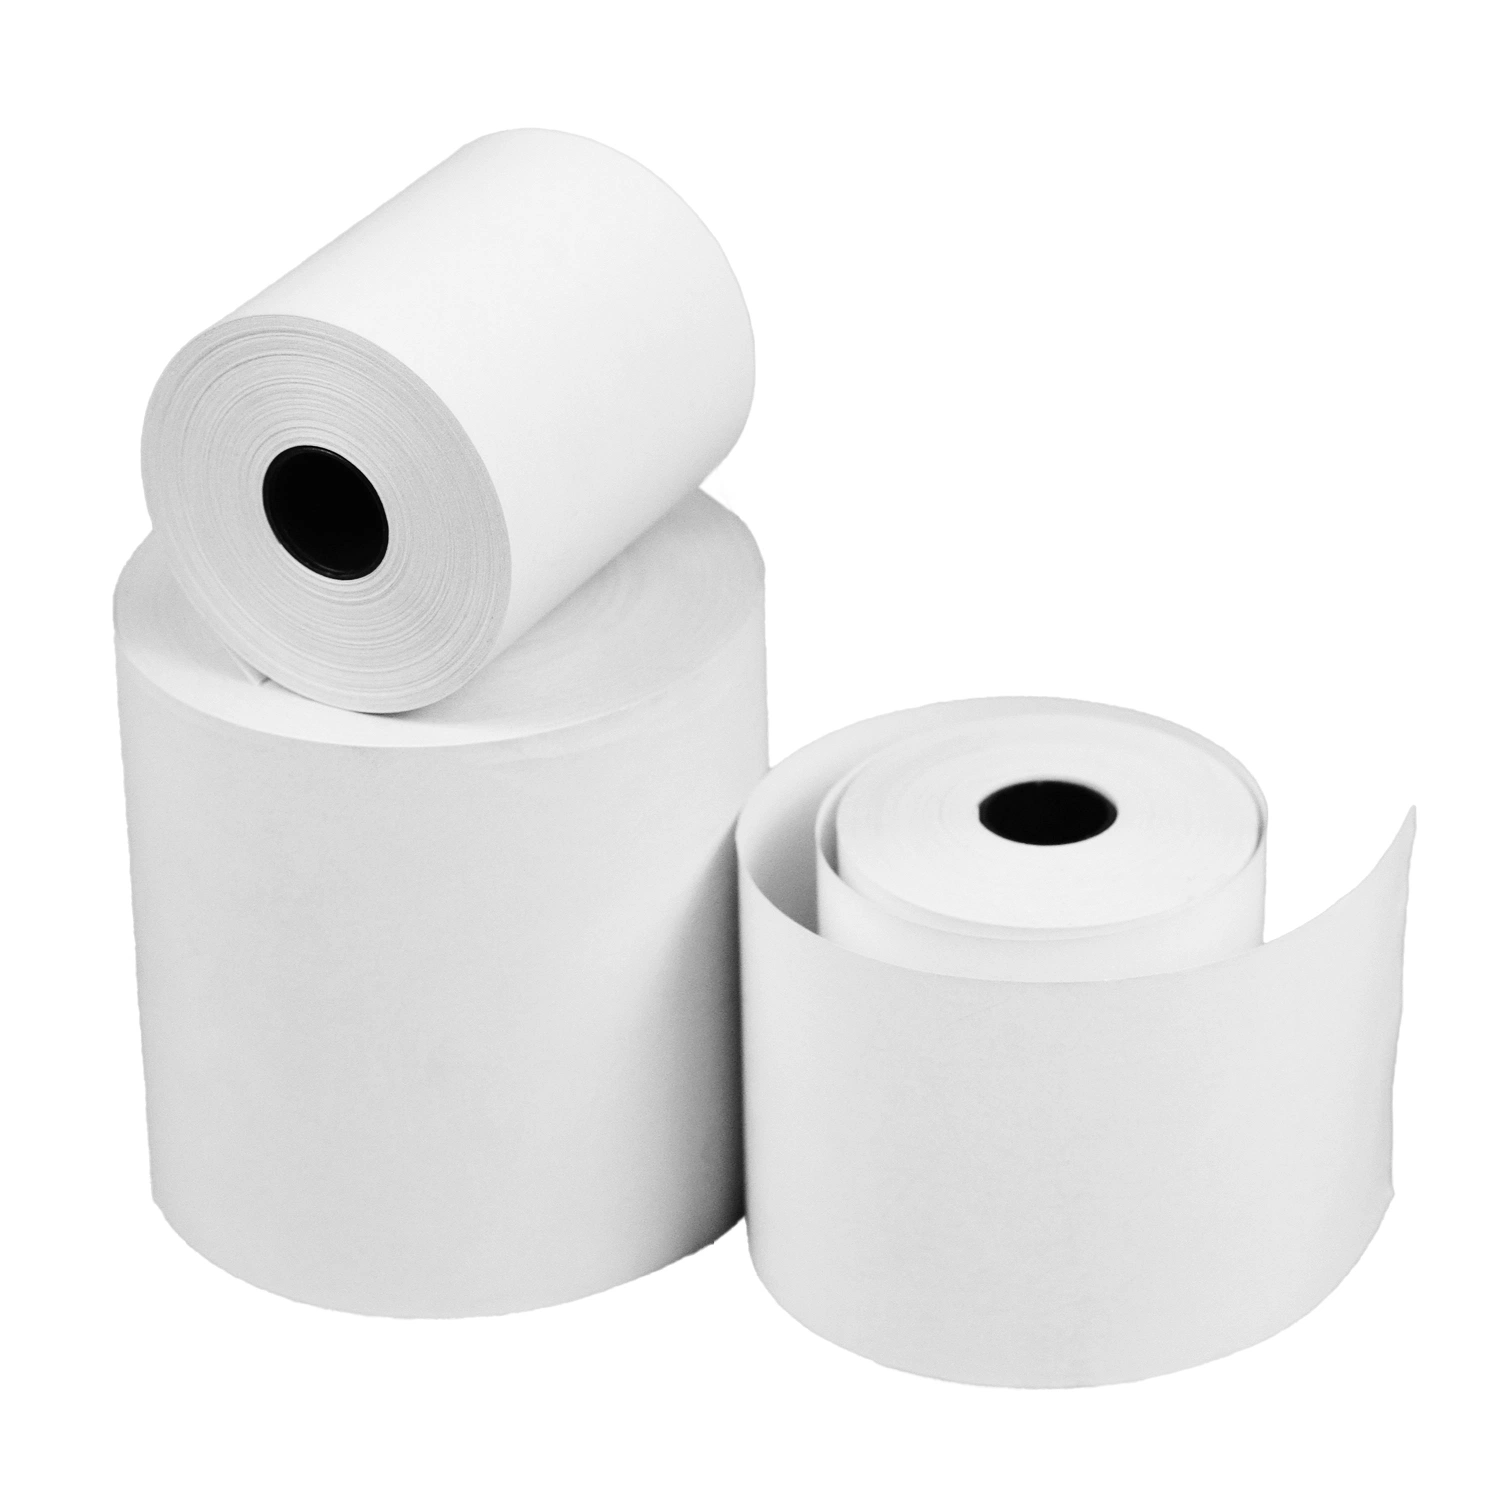 Thermal Receipt Paper Roll Thermal Printer Paper Cash Register Roll